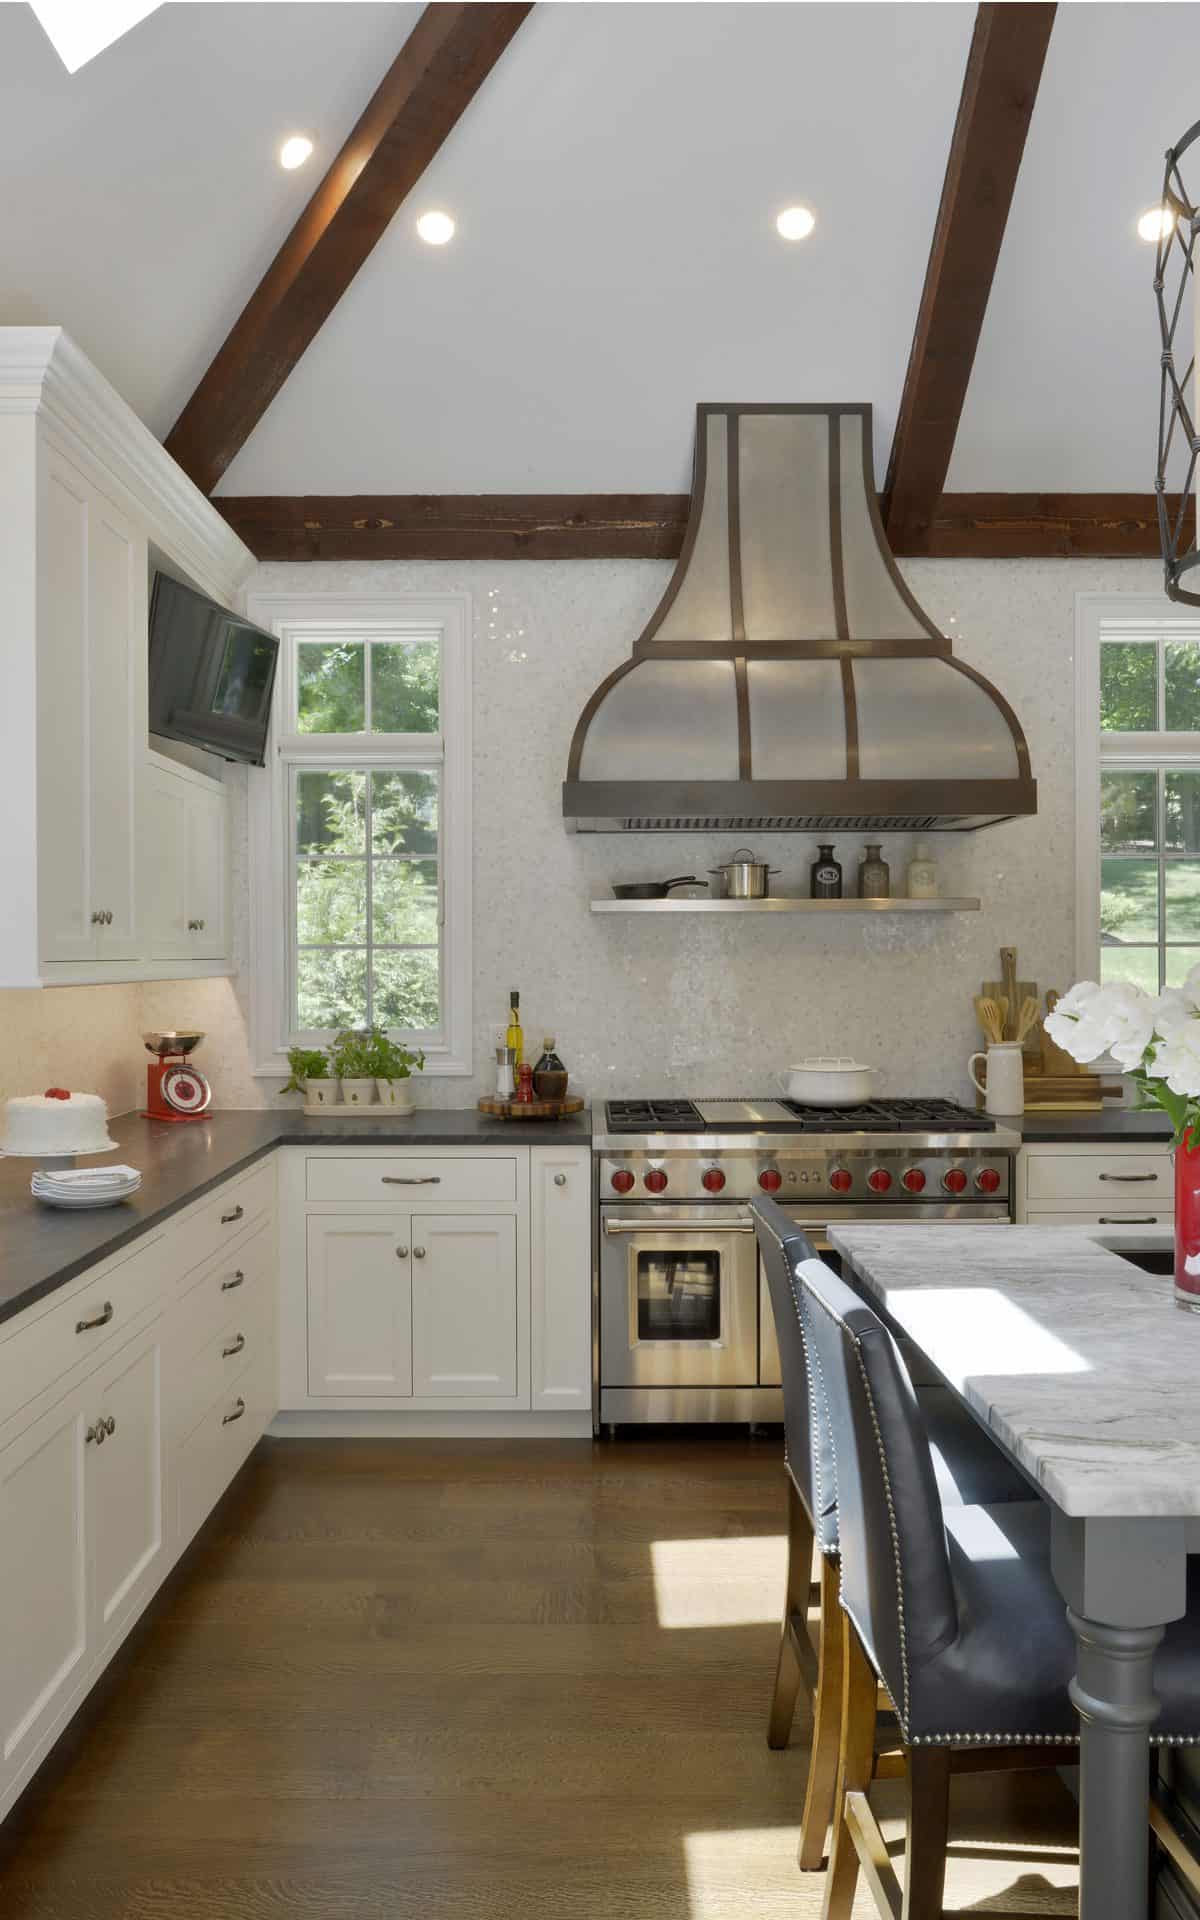 White classic kitchen features dark wood beams, elegant hoodvent, large windows and white Bilotta cabinetry.